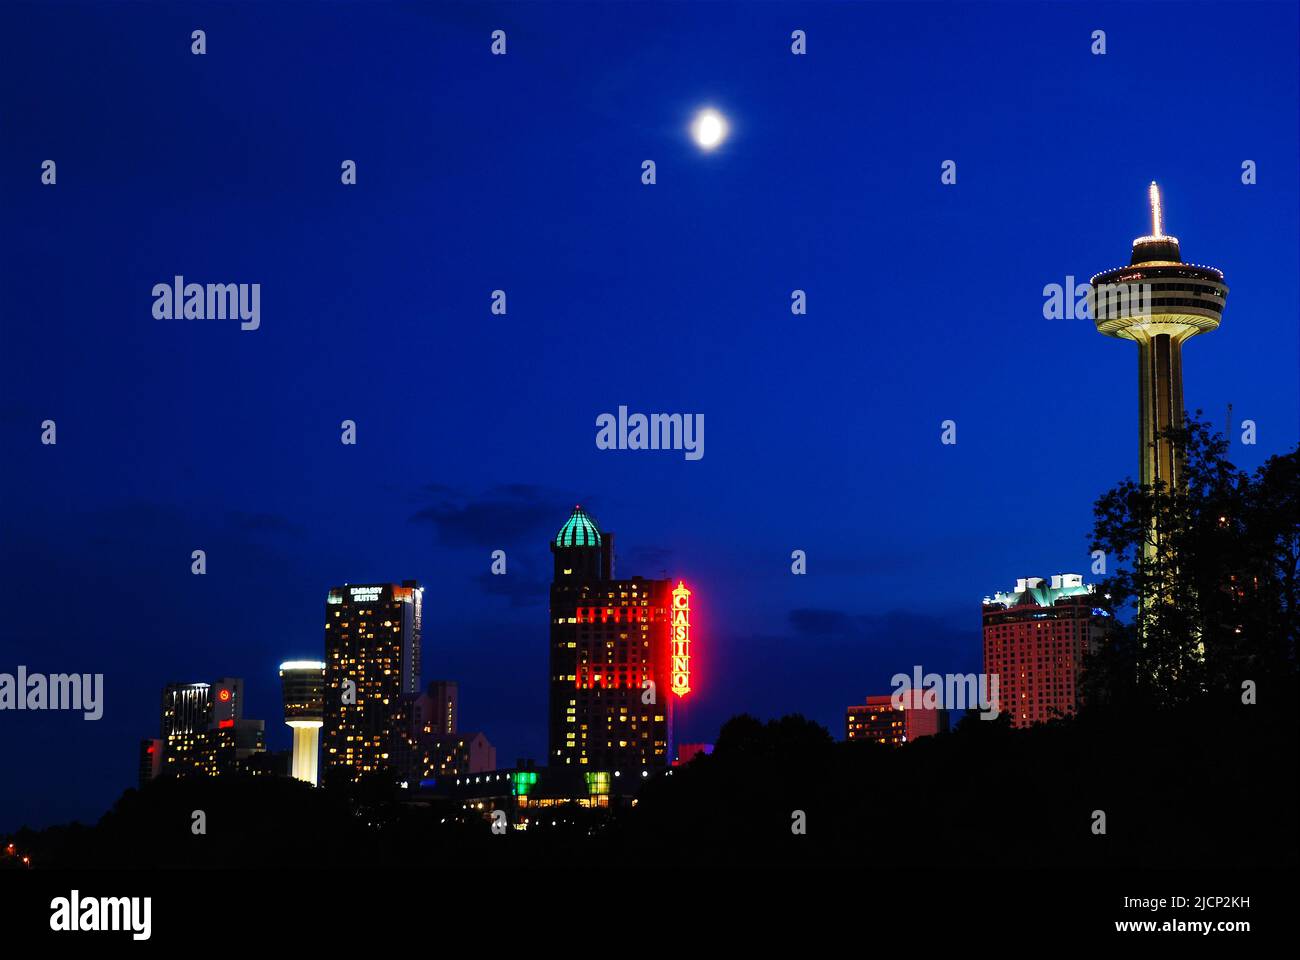 A full moon rises over the hotels and observation towers that make up the skyline of Niagara Falls, Ontario, Canada Stock Photo